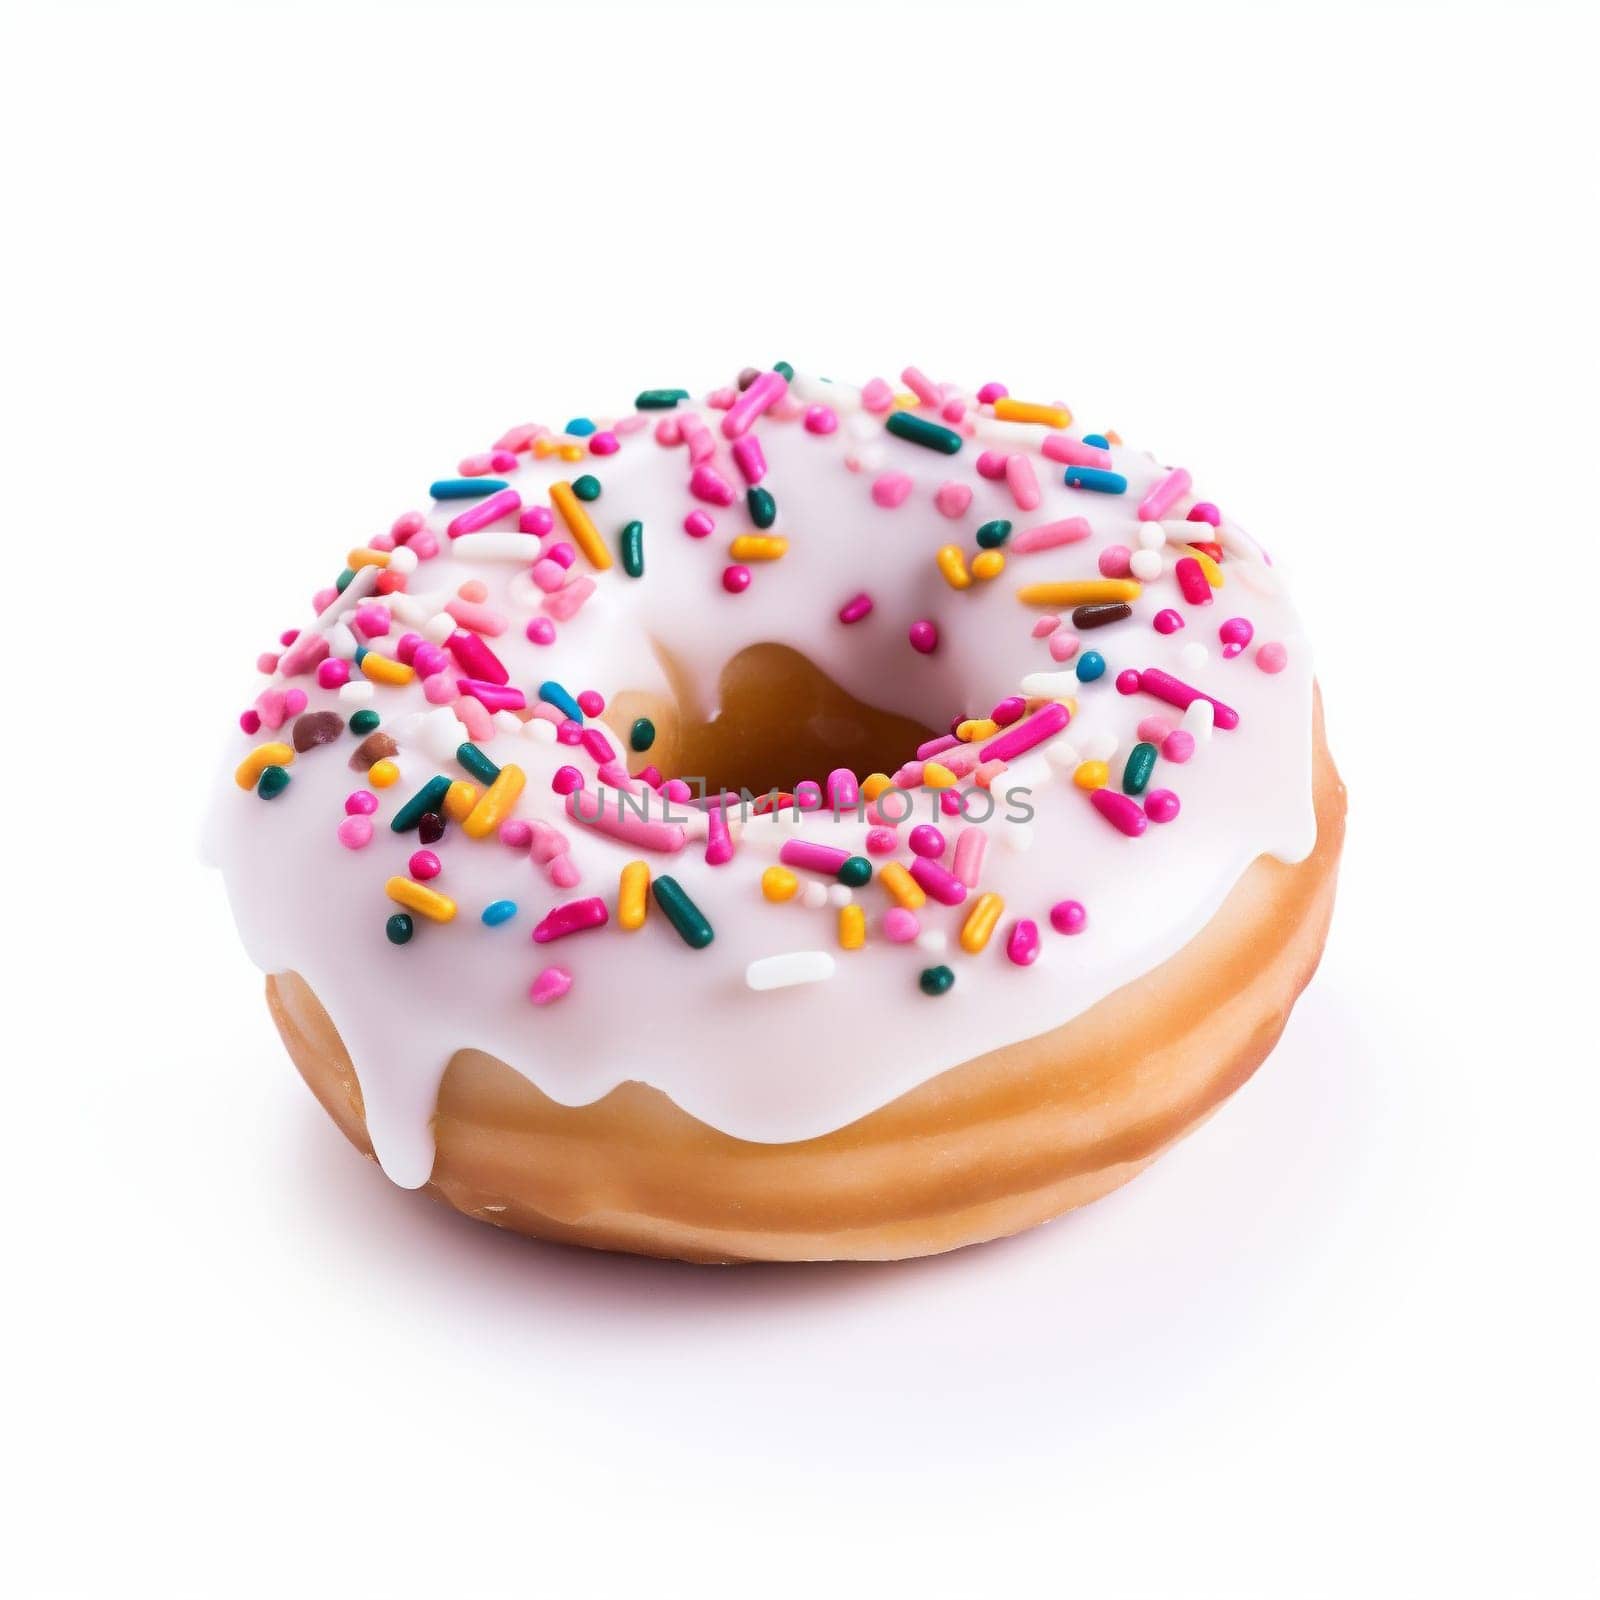 Sweet Vanilla Donut on White Background. White Donut Decorated with Colorful Sprinkles Isolated on White Background.